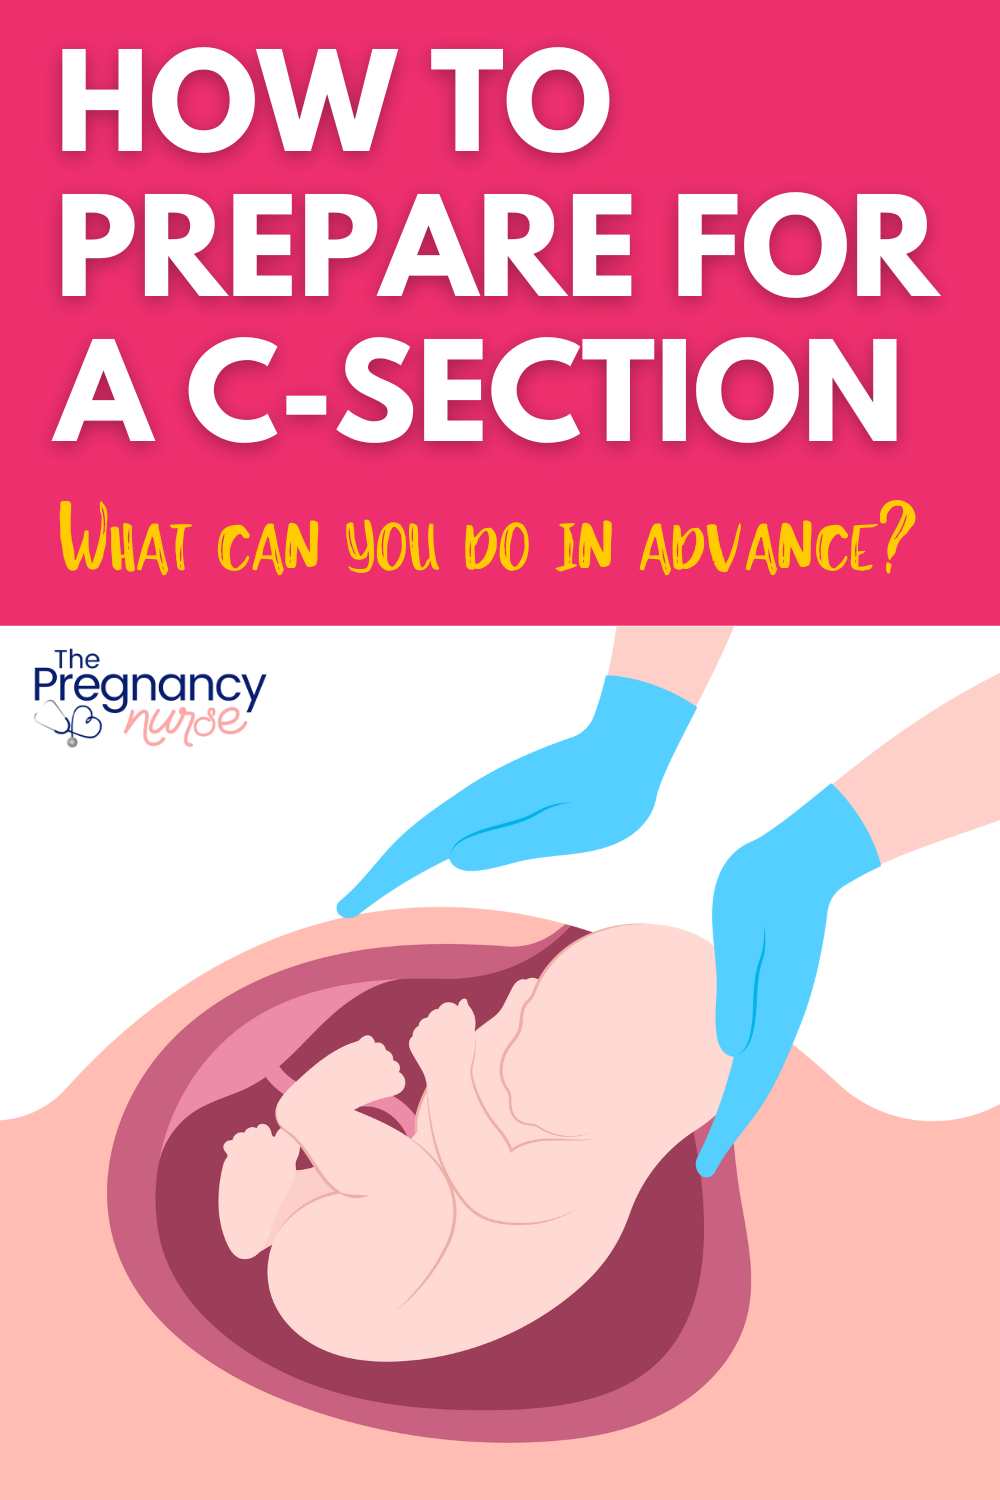 "Embark on a well-prepared journey for your upcoming C-section with our comprehensive guide. From crafting a detailed birth plan to understanding the nuances of recovery, we've curated expert advice to ensure you feel confident and ready. Pin this invaluable resource for a smooth and stress-free C-section experience. Explore essential tips and insights to make your motherhood journey truly special. #CSectionPreparation #BirthPlan #MotherhoodTips #CSectionGuide #PregnancyJourney"